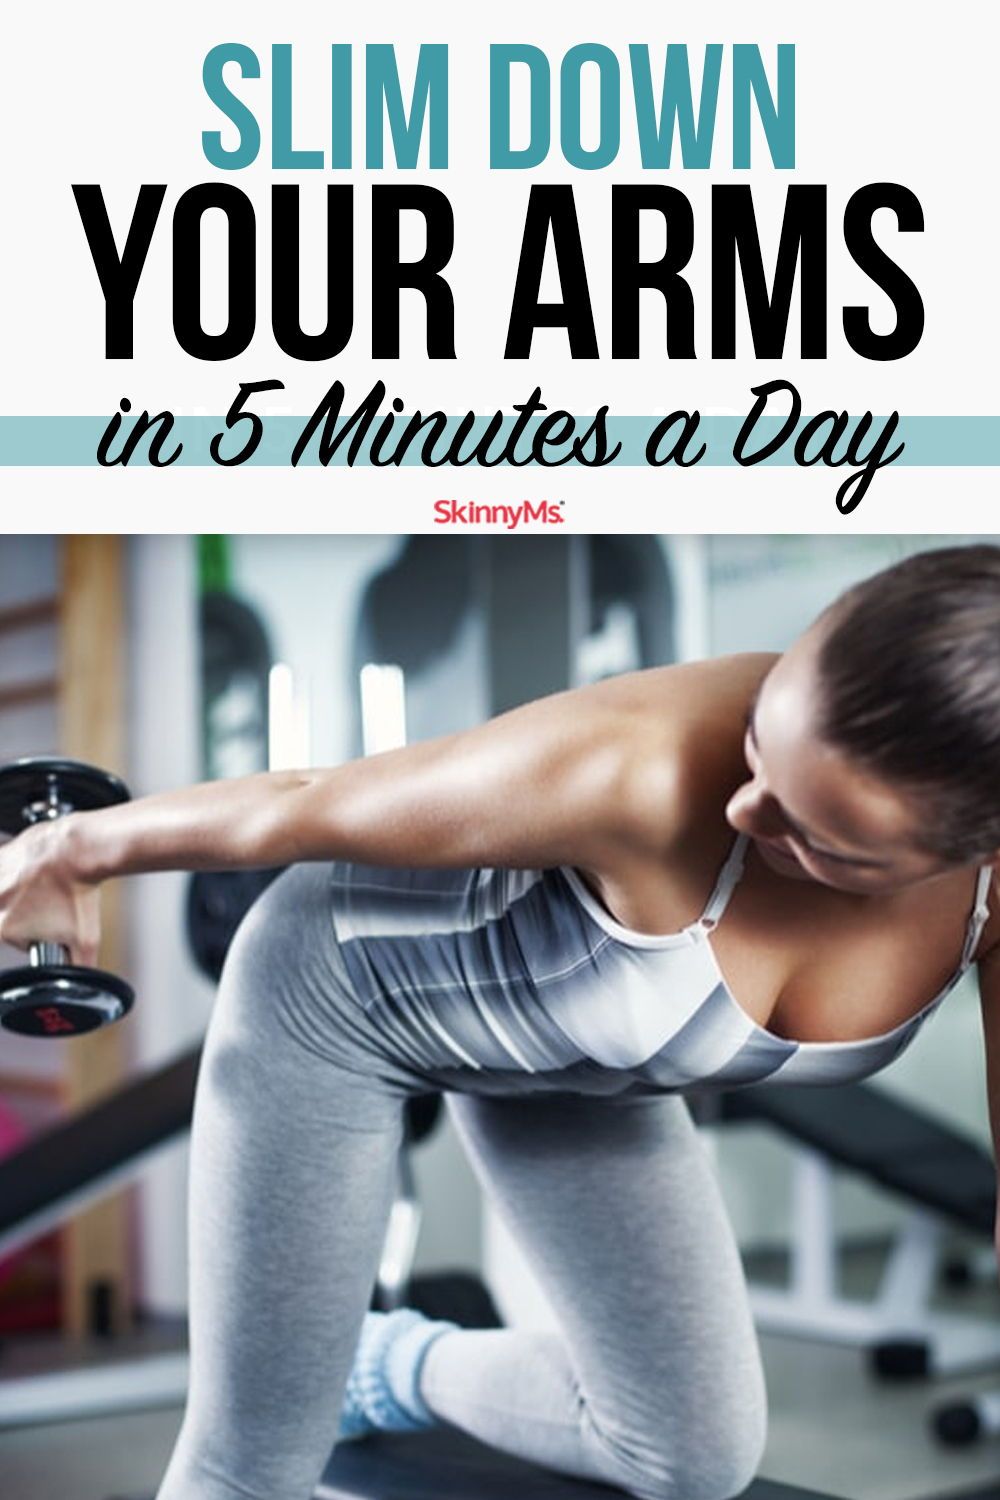 Slim Down Your Arms in 5 Minutes a Day